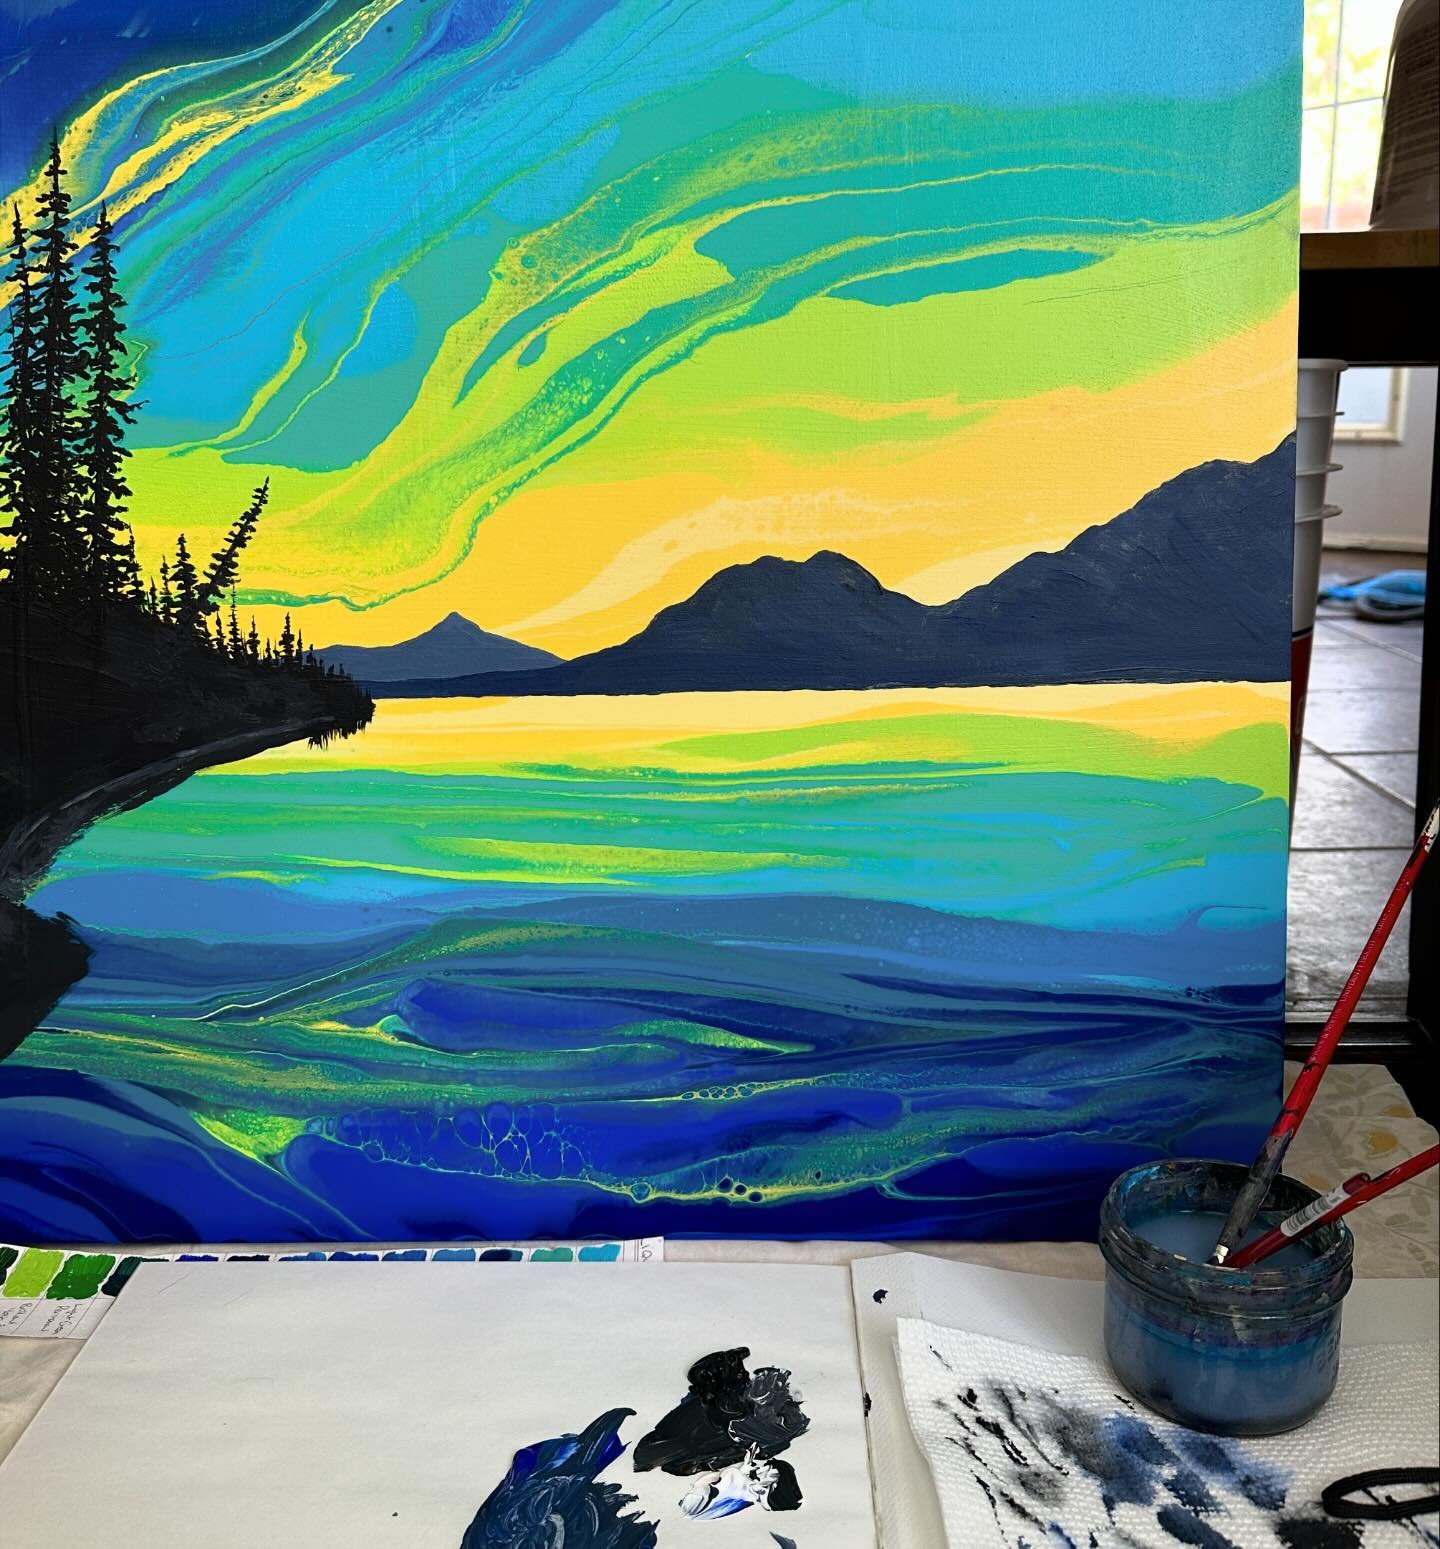 Some fun new Yukon landscape paintings in progress&hellip; this one&rsquo;s big! Oh, I can&rsquo;t wait to see how it turns out! 
❤️🎨🤗
#workinprogress #abstractlandscapes #yukonartist #northernartist #creatingforhappiness #springcreations #artforyo